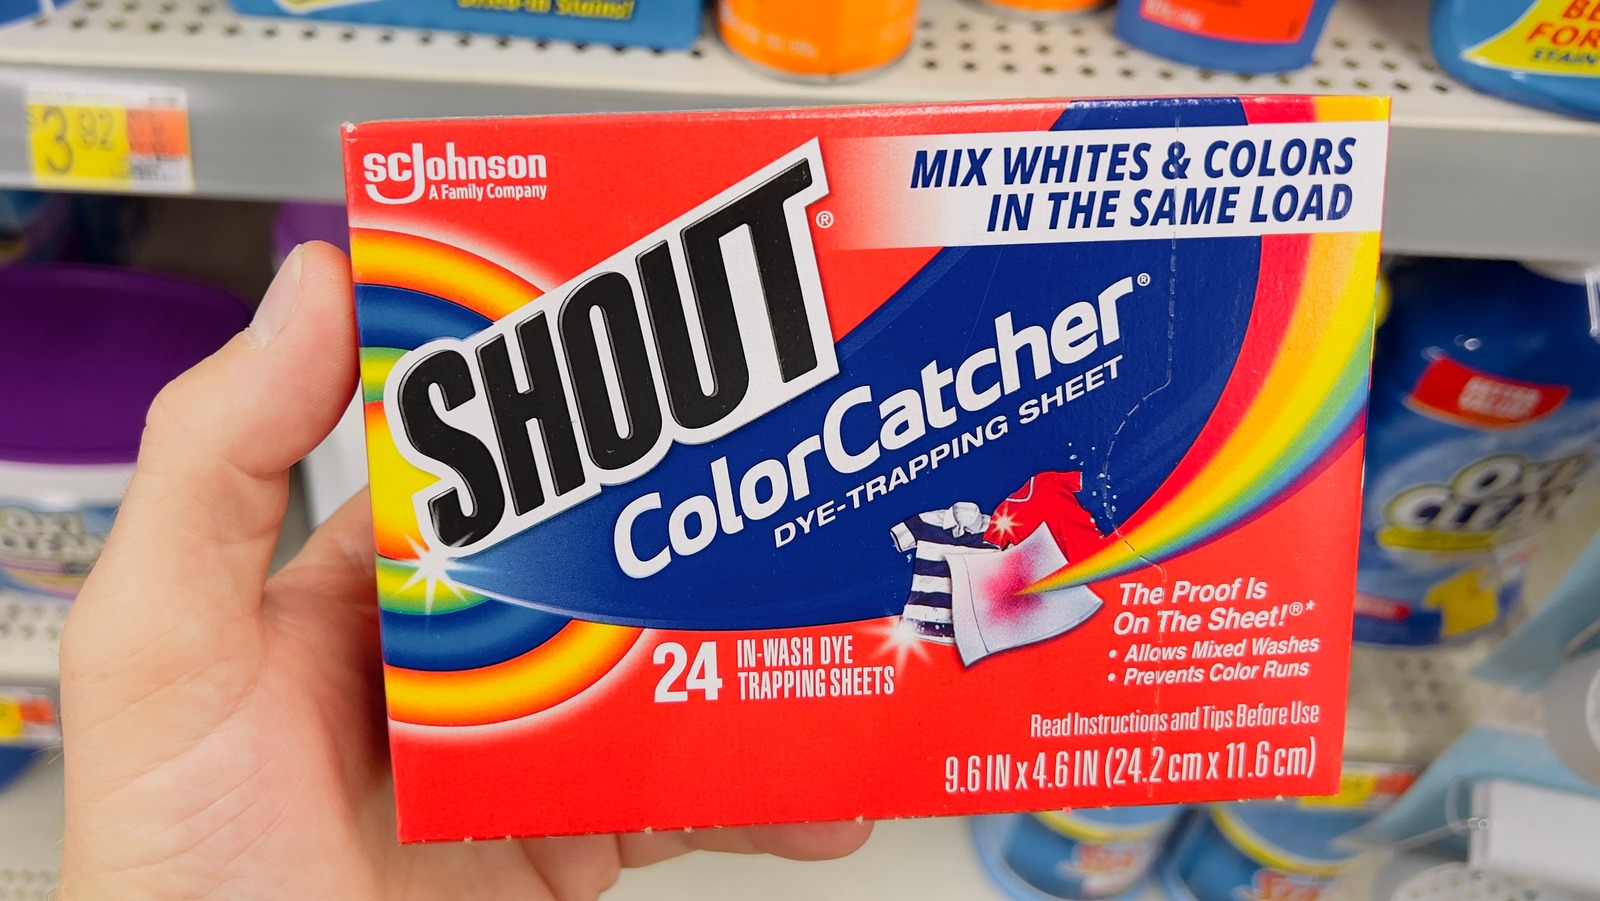 Ran across Shout Color Catcher at the store. I don't have hot